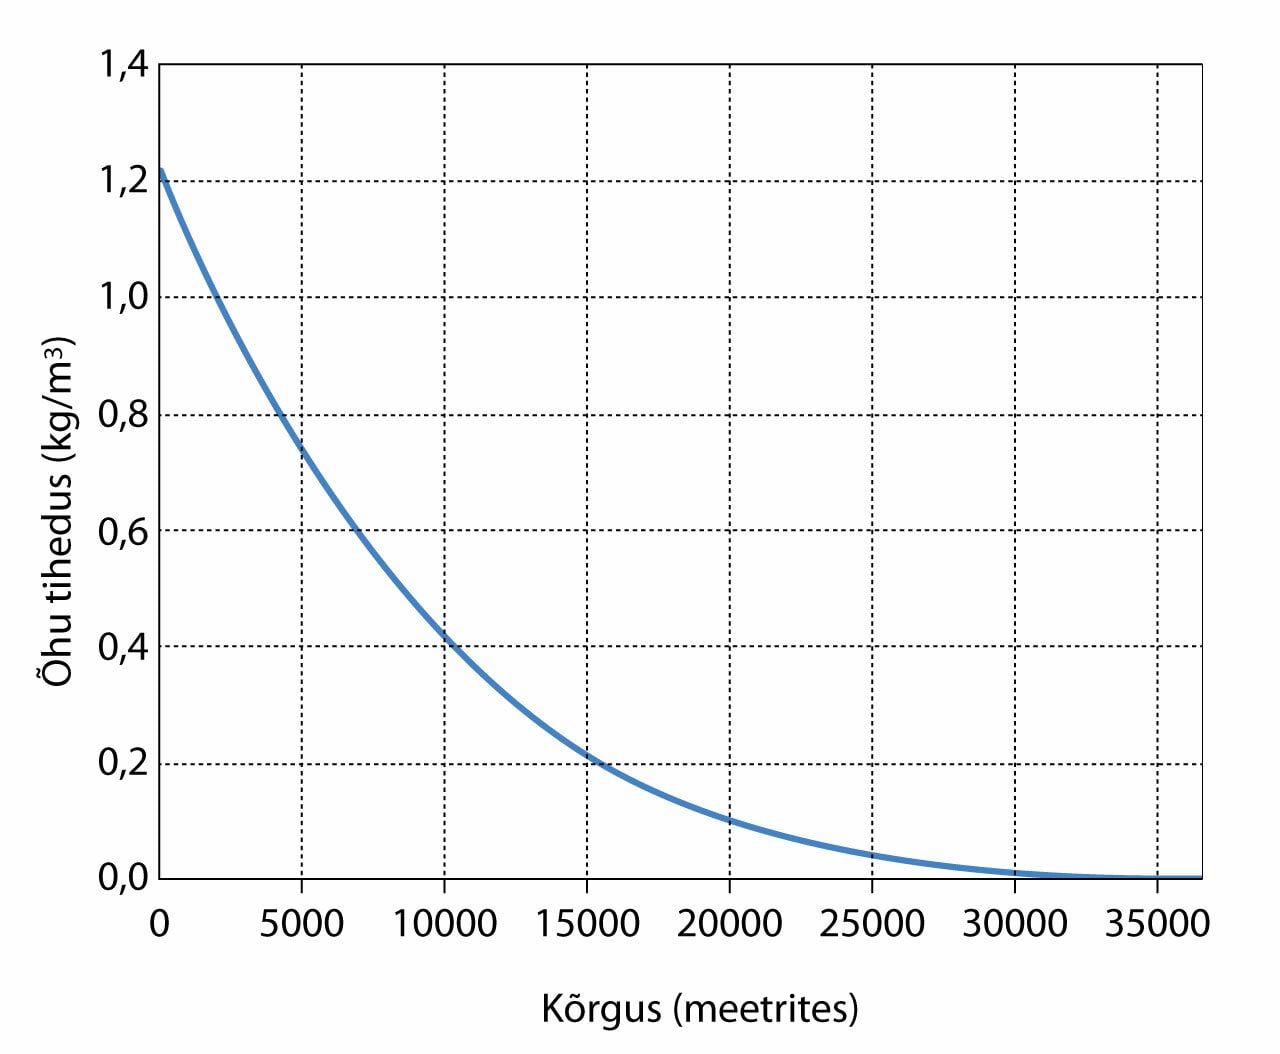 Air density as a function of altitude